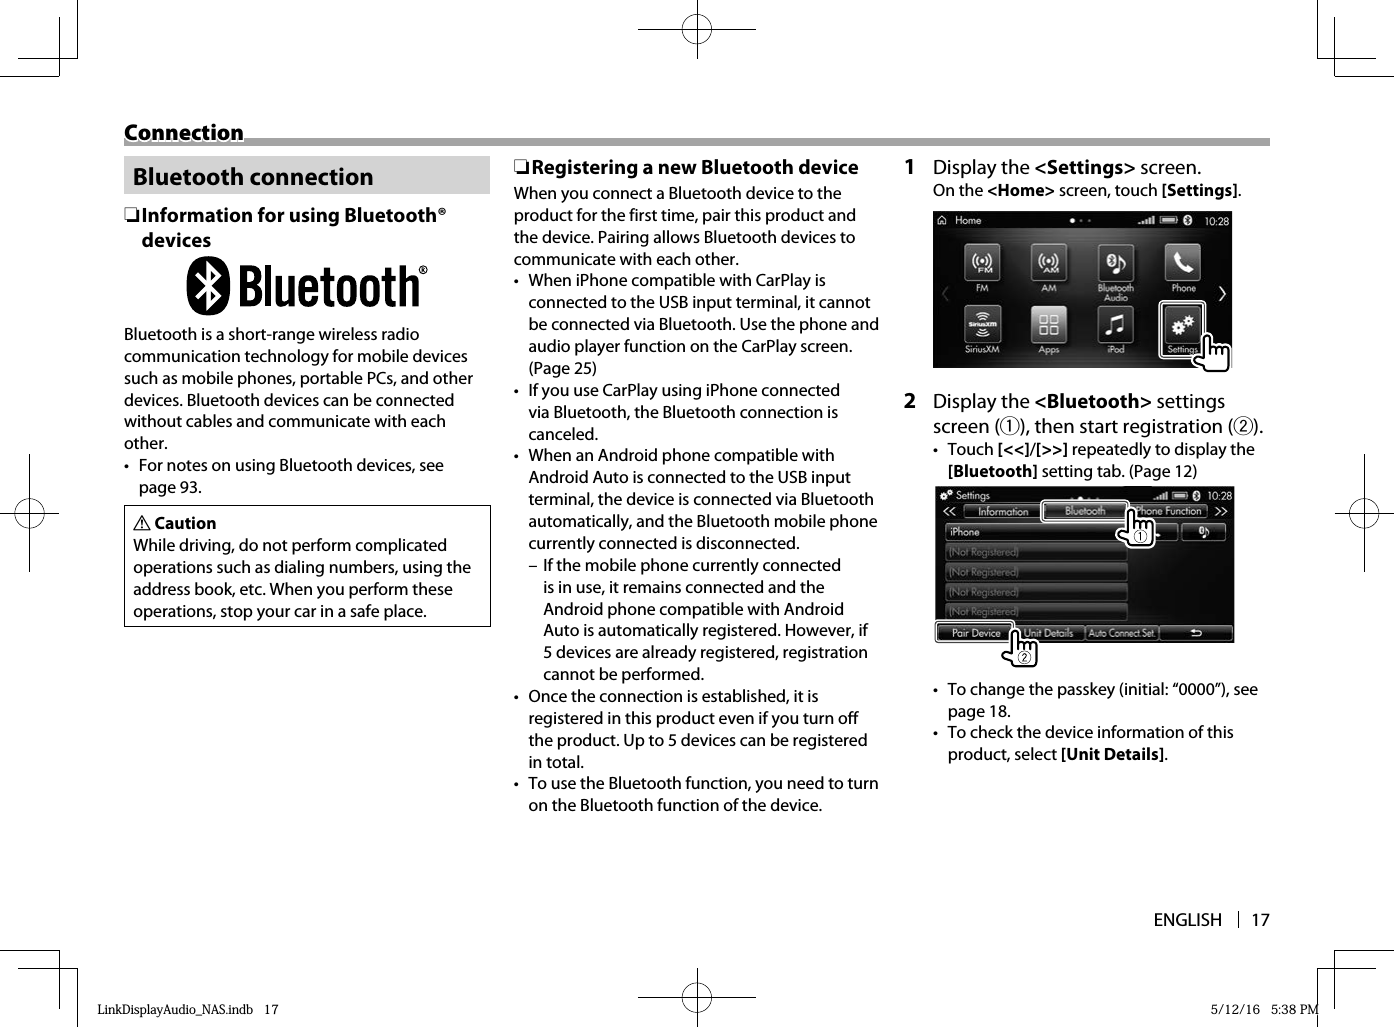 ENGLISH 17ConnectionConnection Bluetooth  connection ❏Information for using Bluetooth® devicesBluetooth is a short-range wireless radio communication technology for mobile devices such as mobile phones, portable PCs, and other devices. Bluetooth devices can be connected without cables and communicate with each other.•  For notes on using Bluetooth devices, see page 93.V CautionWhile driving, do not perform complicated operations such as dialing numbers, using the address book, etc. When you perform these operations, stop your car in a safe place. ❏ Registering a new Bluetooth deviceWhen you connect a Bluetooth device to the product for the first time, pair this product and the device. Pairing allows Bluetooth devices to communicate with each other.•  When iPhone compatible with CarPlay is connected to the USB input terminal, it cannot be connected via Bluetooth. Use the phone and audio player function on the CarPlay screen. (Page 25)•  If you use CarPlay using iPhone connected via Bluetooth, the Bluetooth connection is canceled.•  When an Android phone compatible with Android Auto is connected to the USB input terminal, the device is connected via Bluetooth automatically, and the Bluetooth mobile phone currently connected is disconnected. – If the mobile phone currently connected is in use, it remains connected and the Android phone compatible with Android Auto is automatically registered. However, if 5 devices are already registered, registration cannot be performed.•  Once the connection is established, it is registered in this product even if you turn off the product. Up to 5 devices can be registered in total.•  To use the Bluetooth function, you need to turn on the Bluetooth function of the device. 1  Display the &lt;Settings&gt; screen.On the &lt;Home&gt; screen, touch [Settings].  2  Display the &lt;Bluetooth&gt; settings screen (1), then start registration (2).• Touch [&lt;&lt;]/[&gt;&gt;] repeatedly to display the [Bluetooth] setting tab. (Page 12)•  To change the passkey (initial: “0000”), see page 18.•  To check the device information of this product, select [Unit Details].LinkDisplayAudio_NAS.indb   17LinkDisplayAudio_NAS.indb   17 5/12/16   5:38 PM5/12/16   5:38 PM